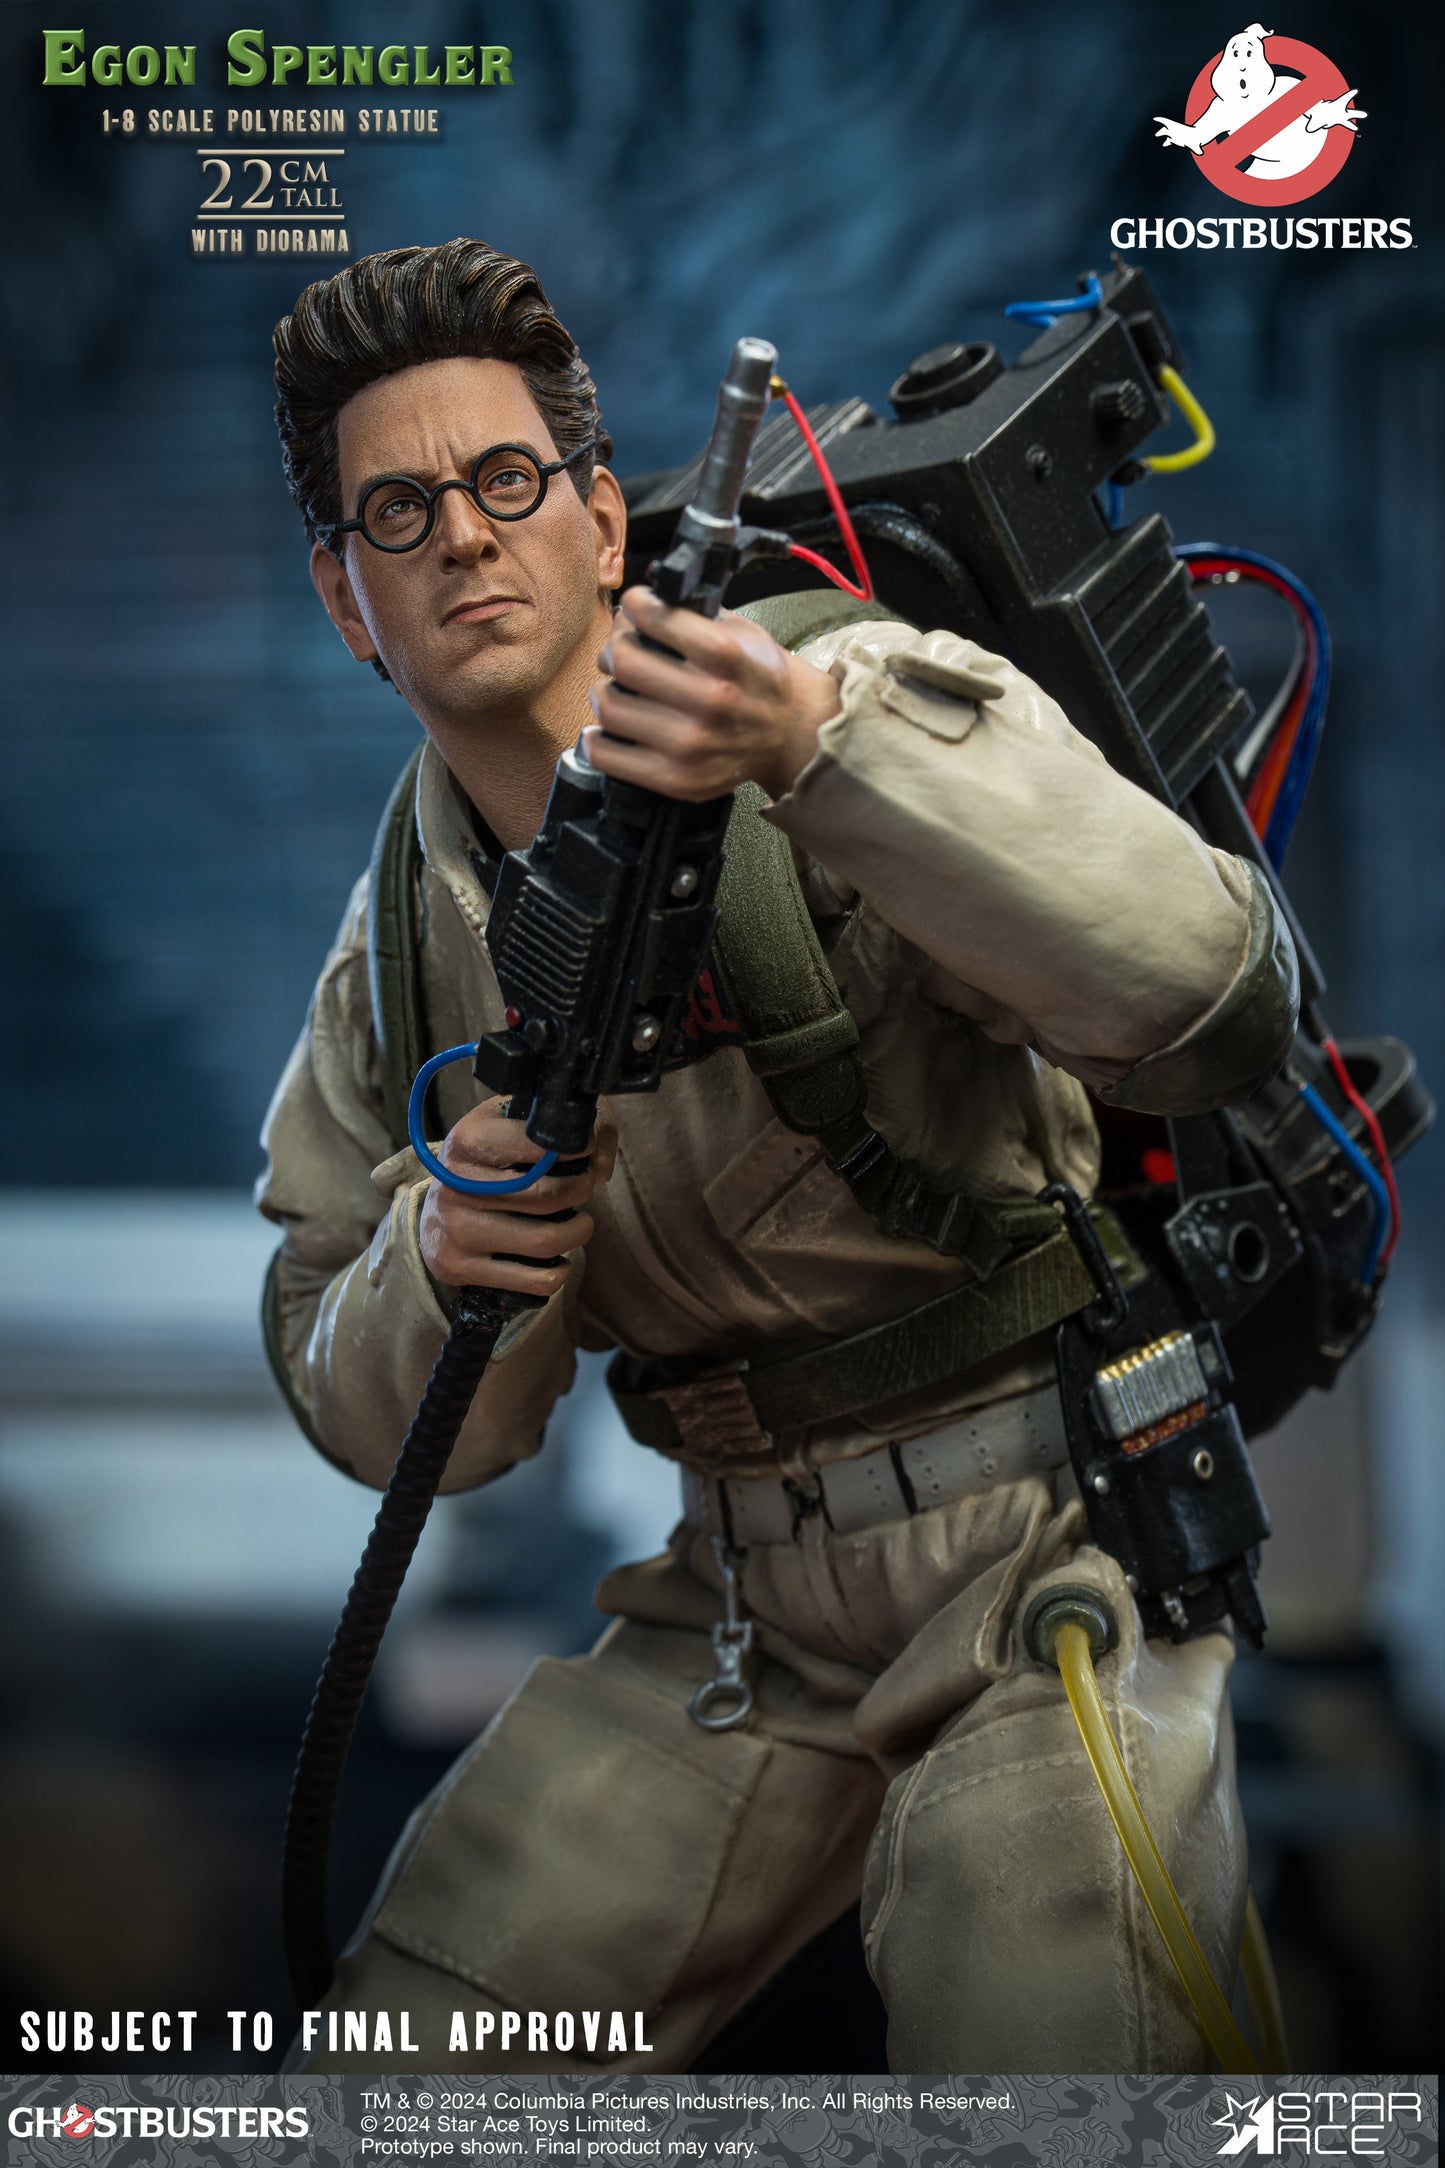 GHOSTBUSTERS EGON SPENGLER 1/8 SCALE POLYRESIN STATUE